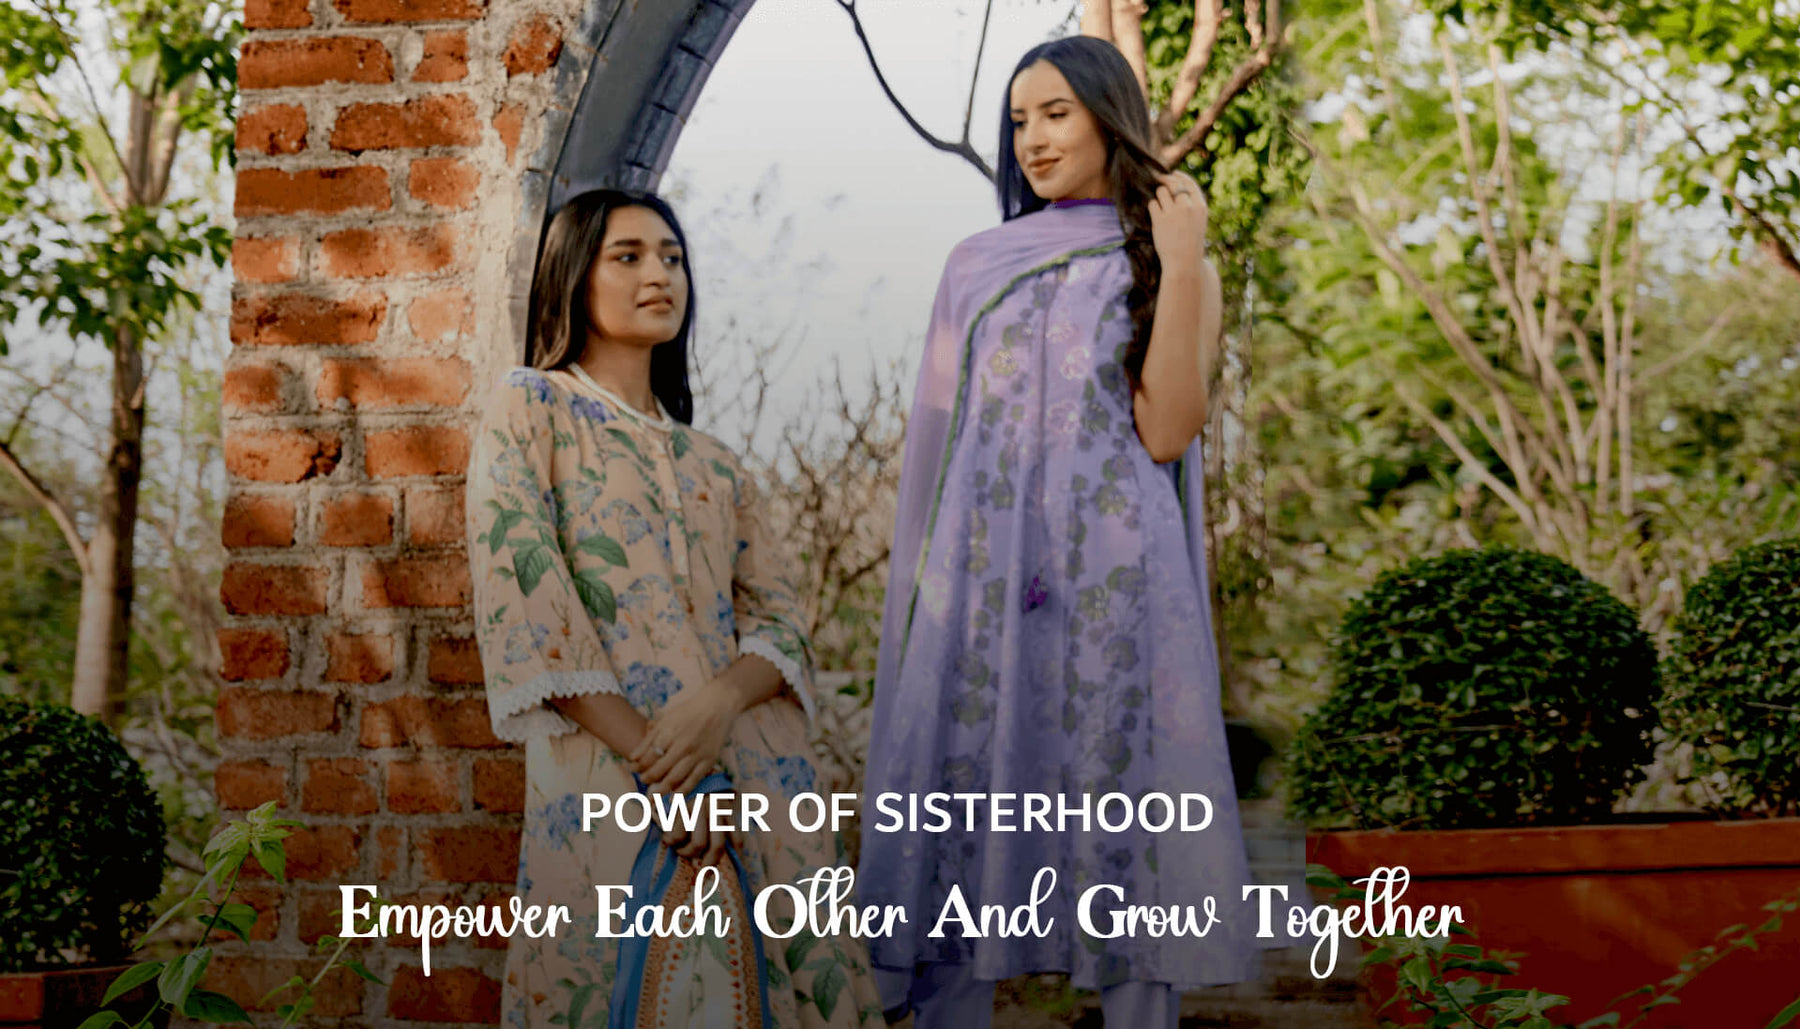 Power Of Sisterhood: Empower Each Other And Grow Together